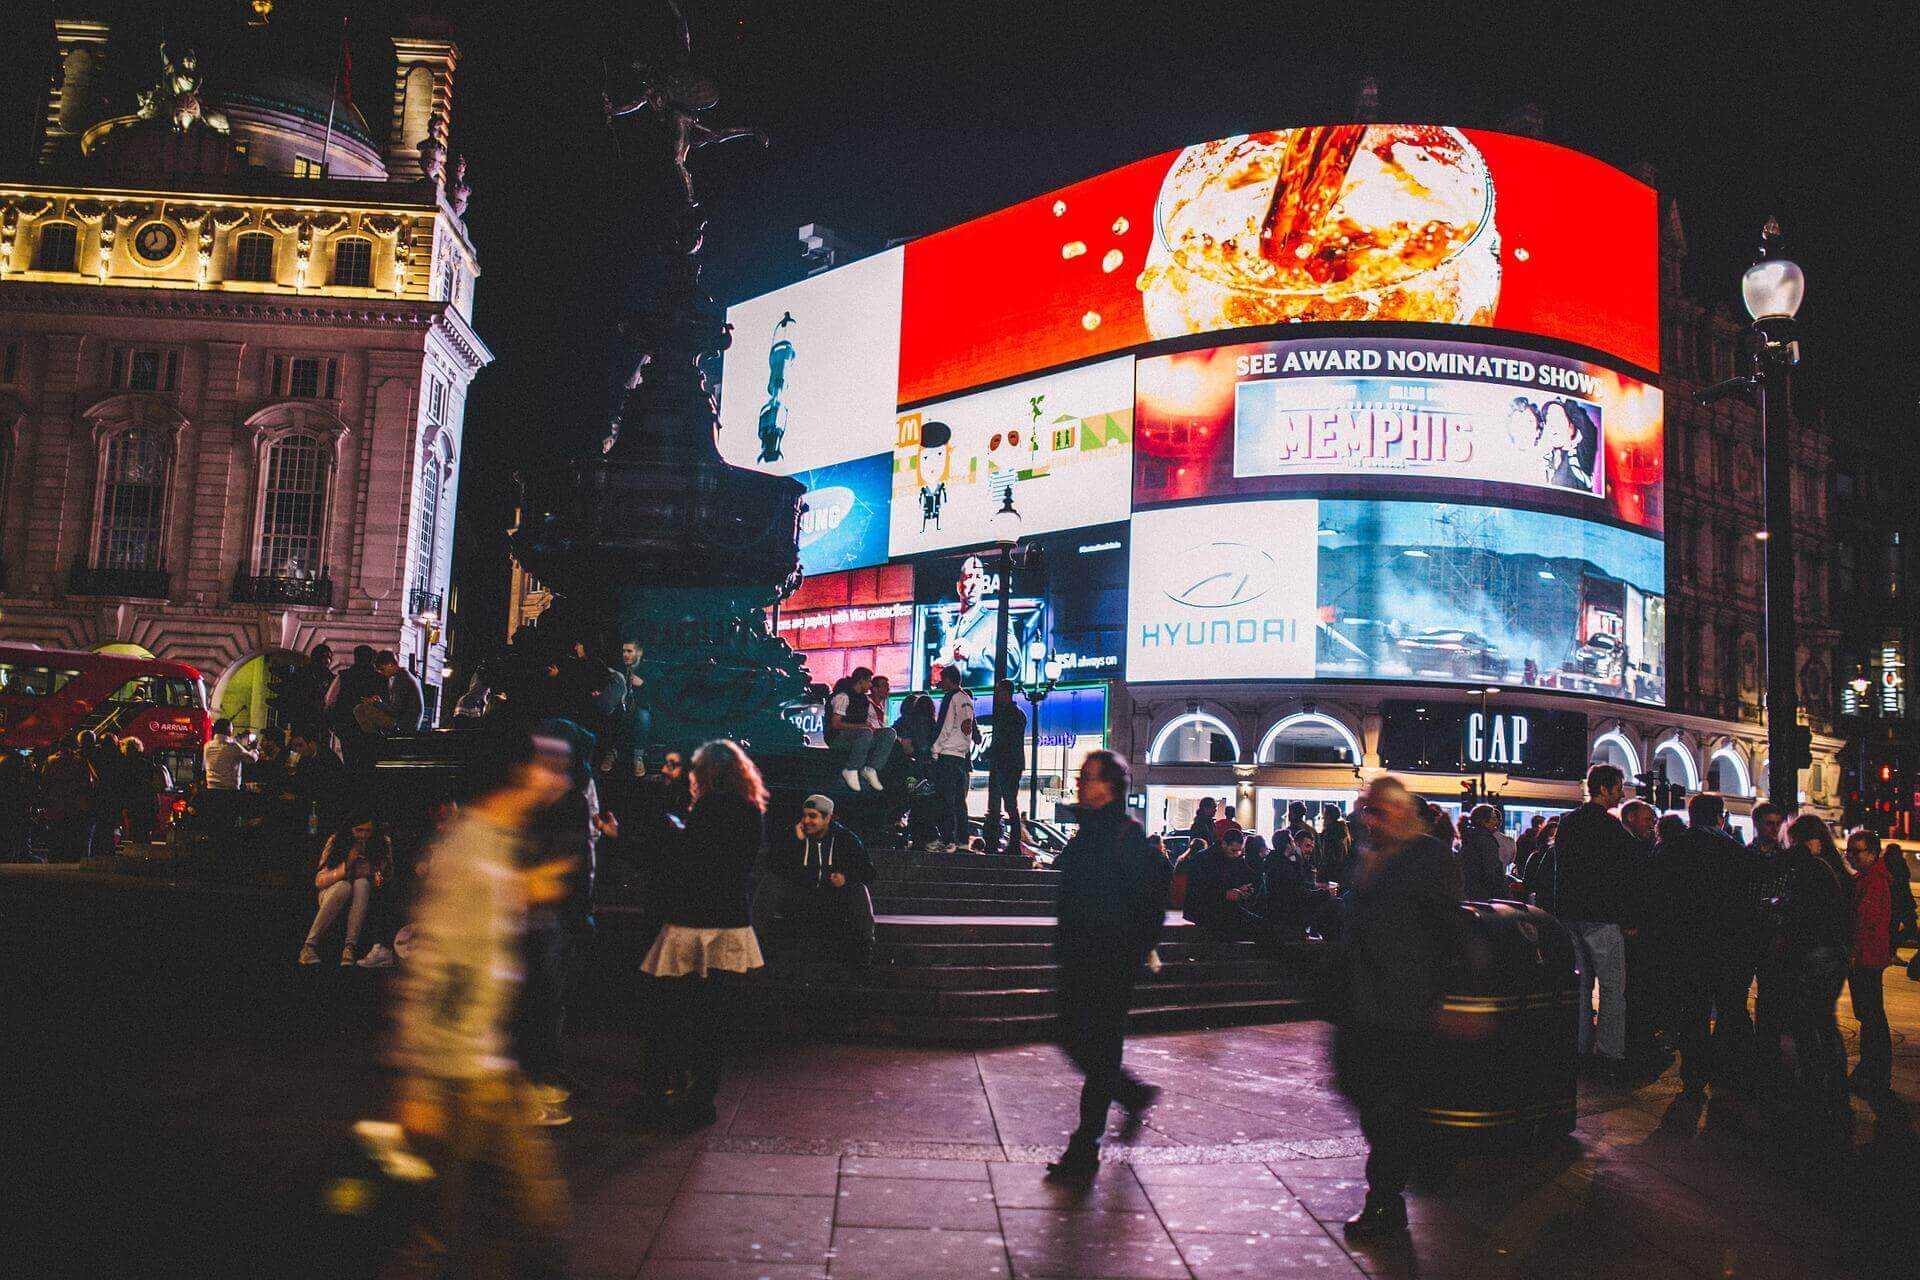 piccadilly-circus-926802_1920